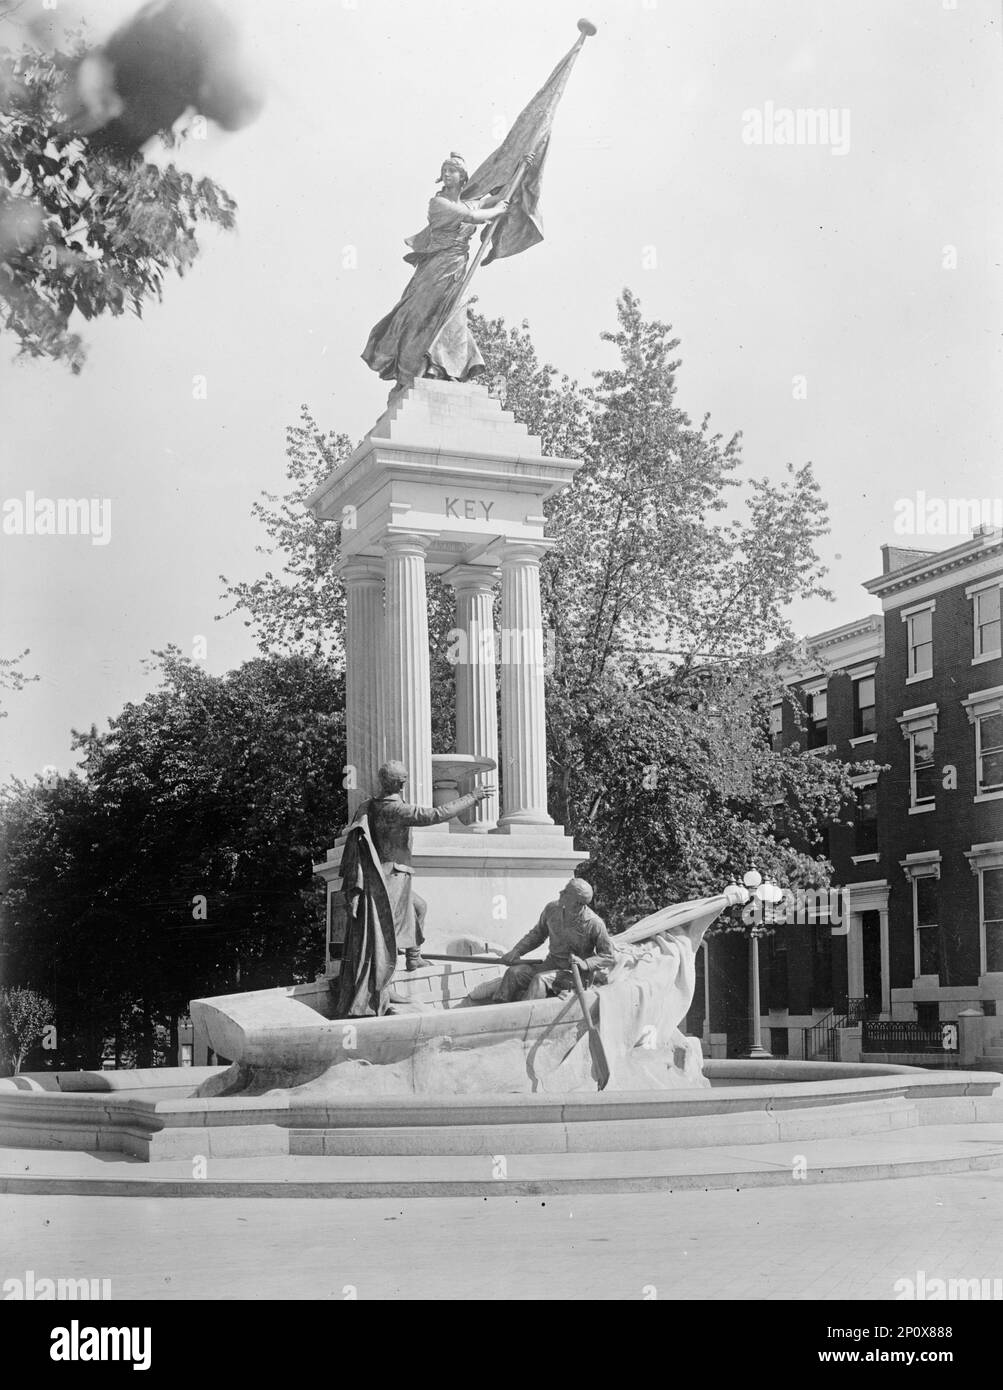 Francis Scott Key Monument in Baltimore, 1914. US lawyer, author and poet Francis Scott Key wrote the lyrics for &quot;The Star-Spangled Banner&quot;. Monument designed by Antonin Merci&#xe9;. Stock Photo